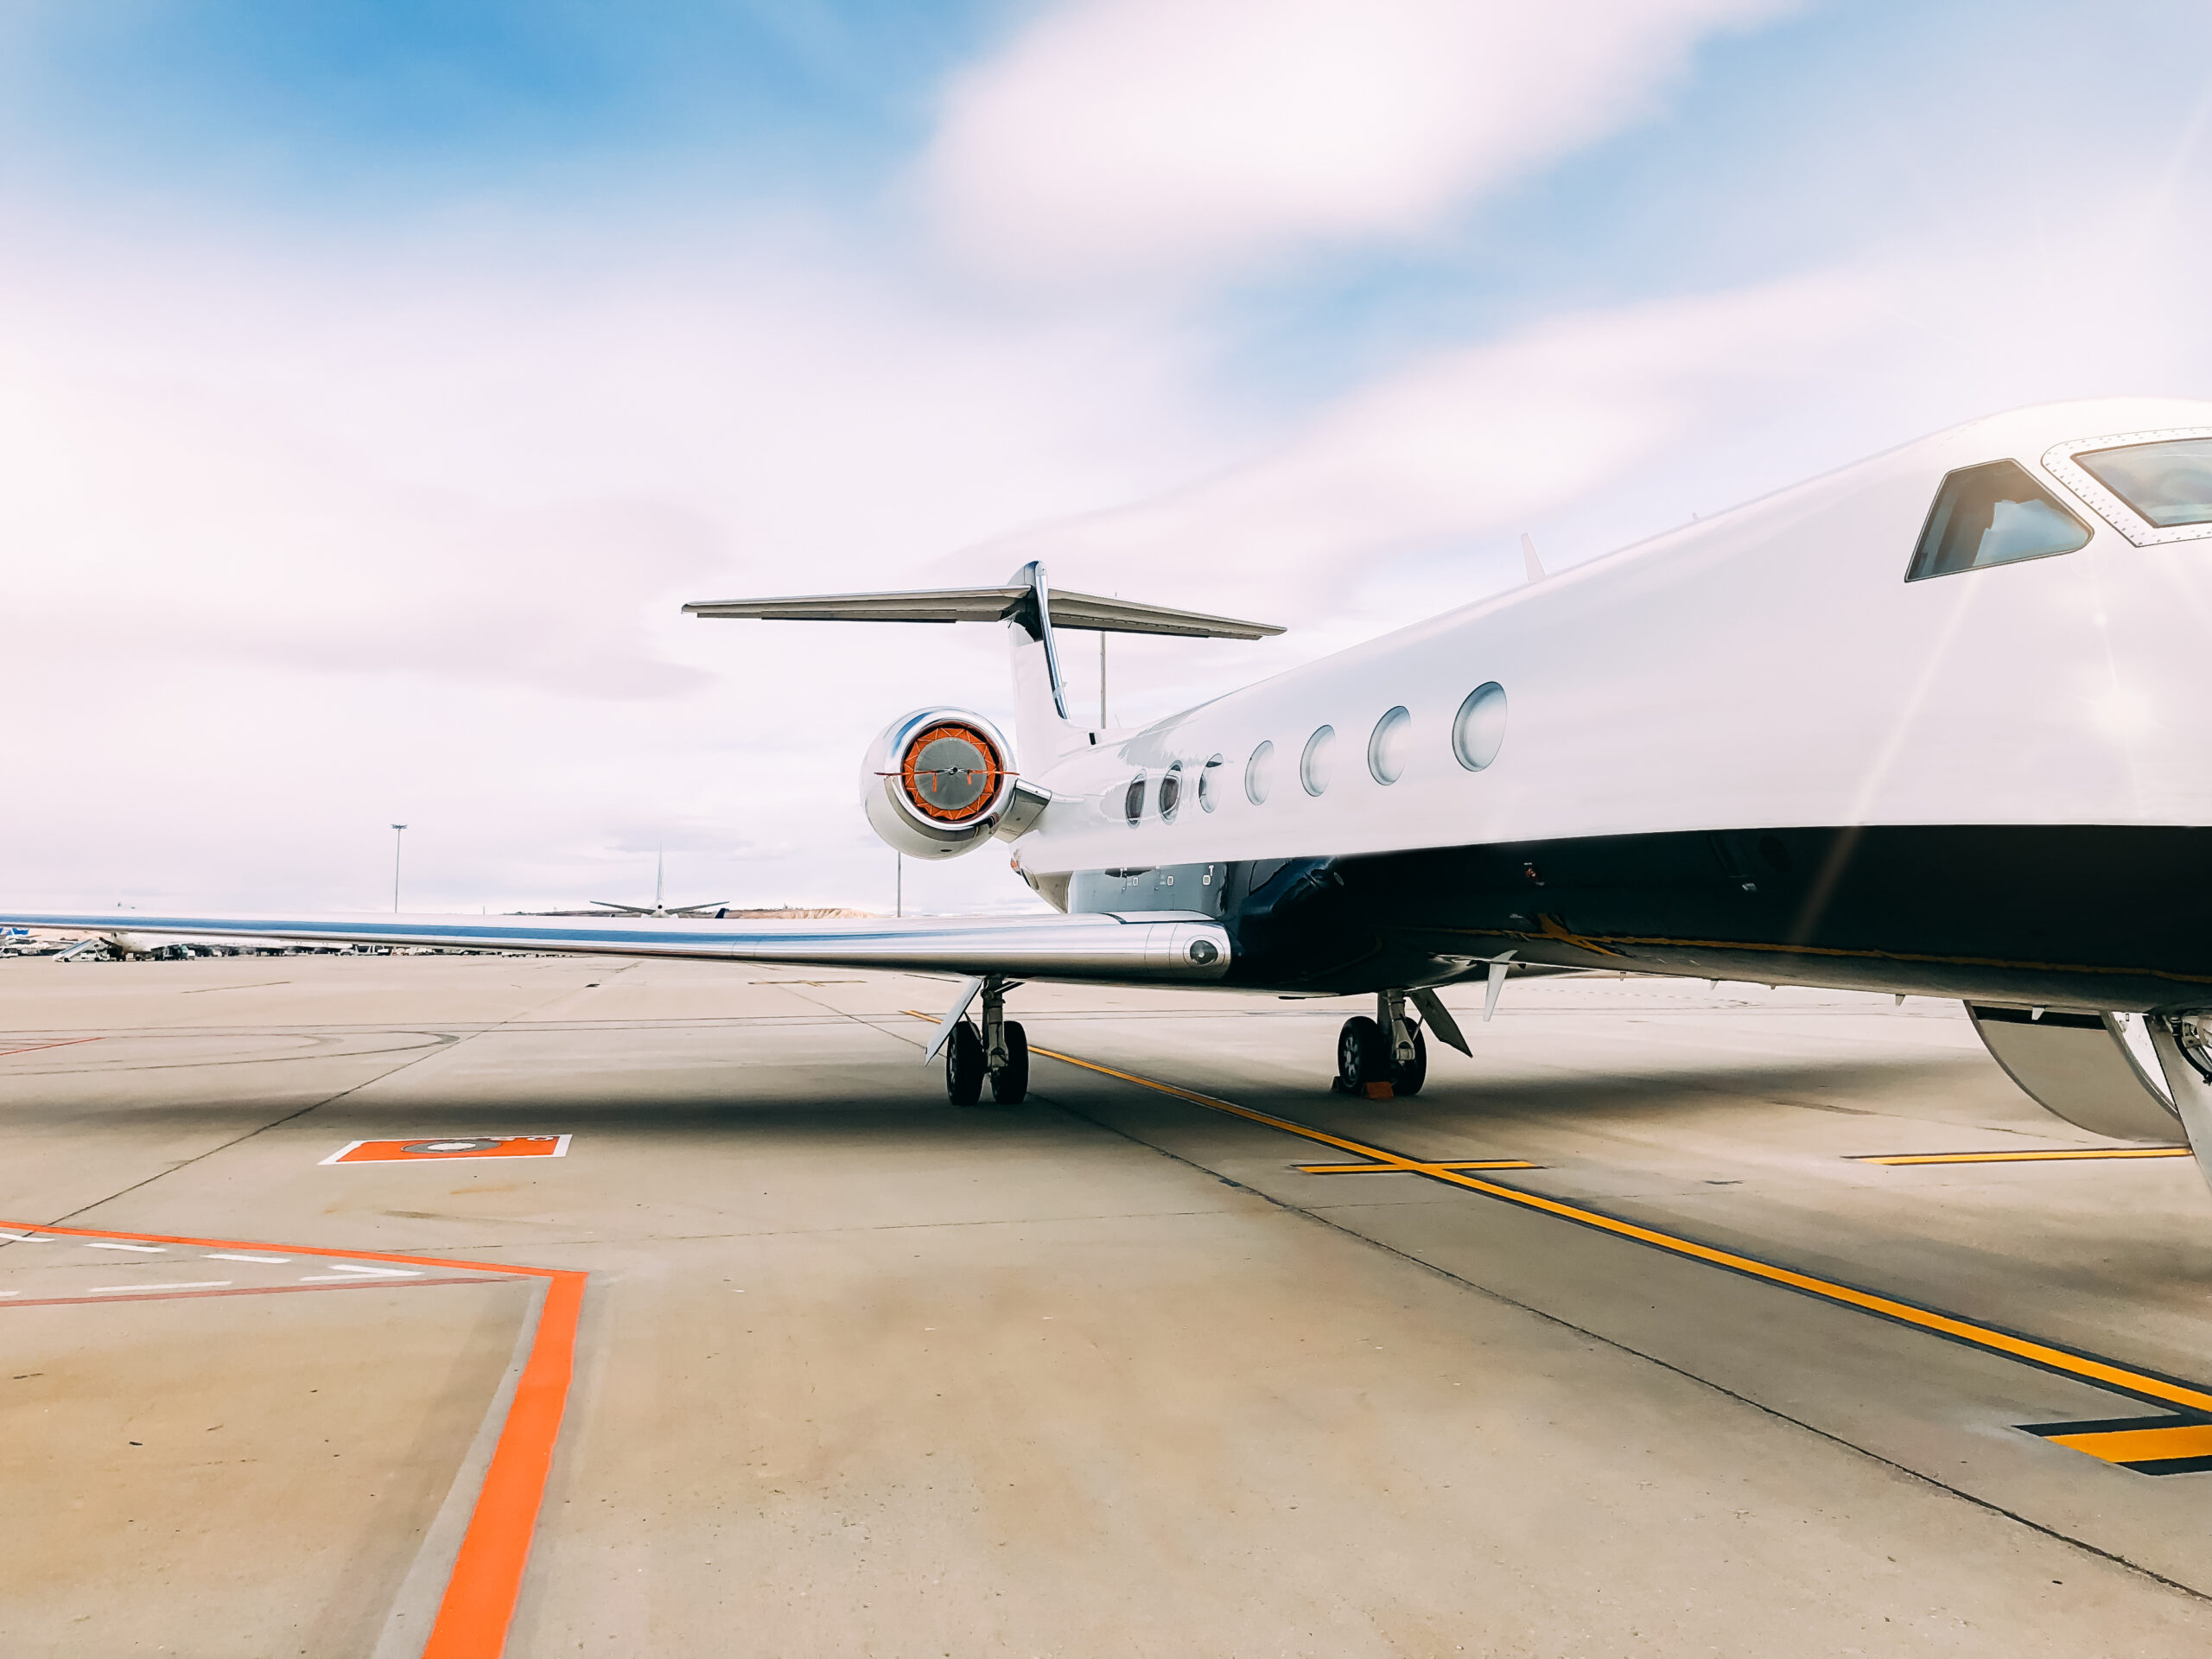 take-control-of-your-time-with-private-jet1_travellersofindia.com